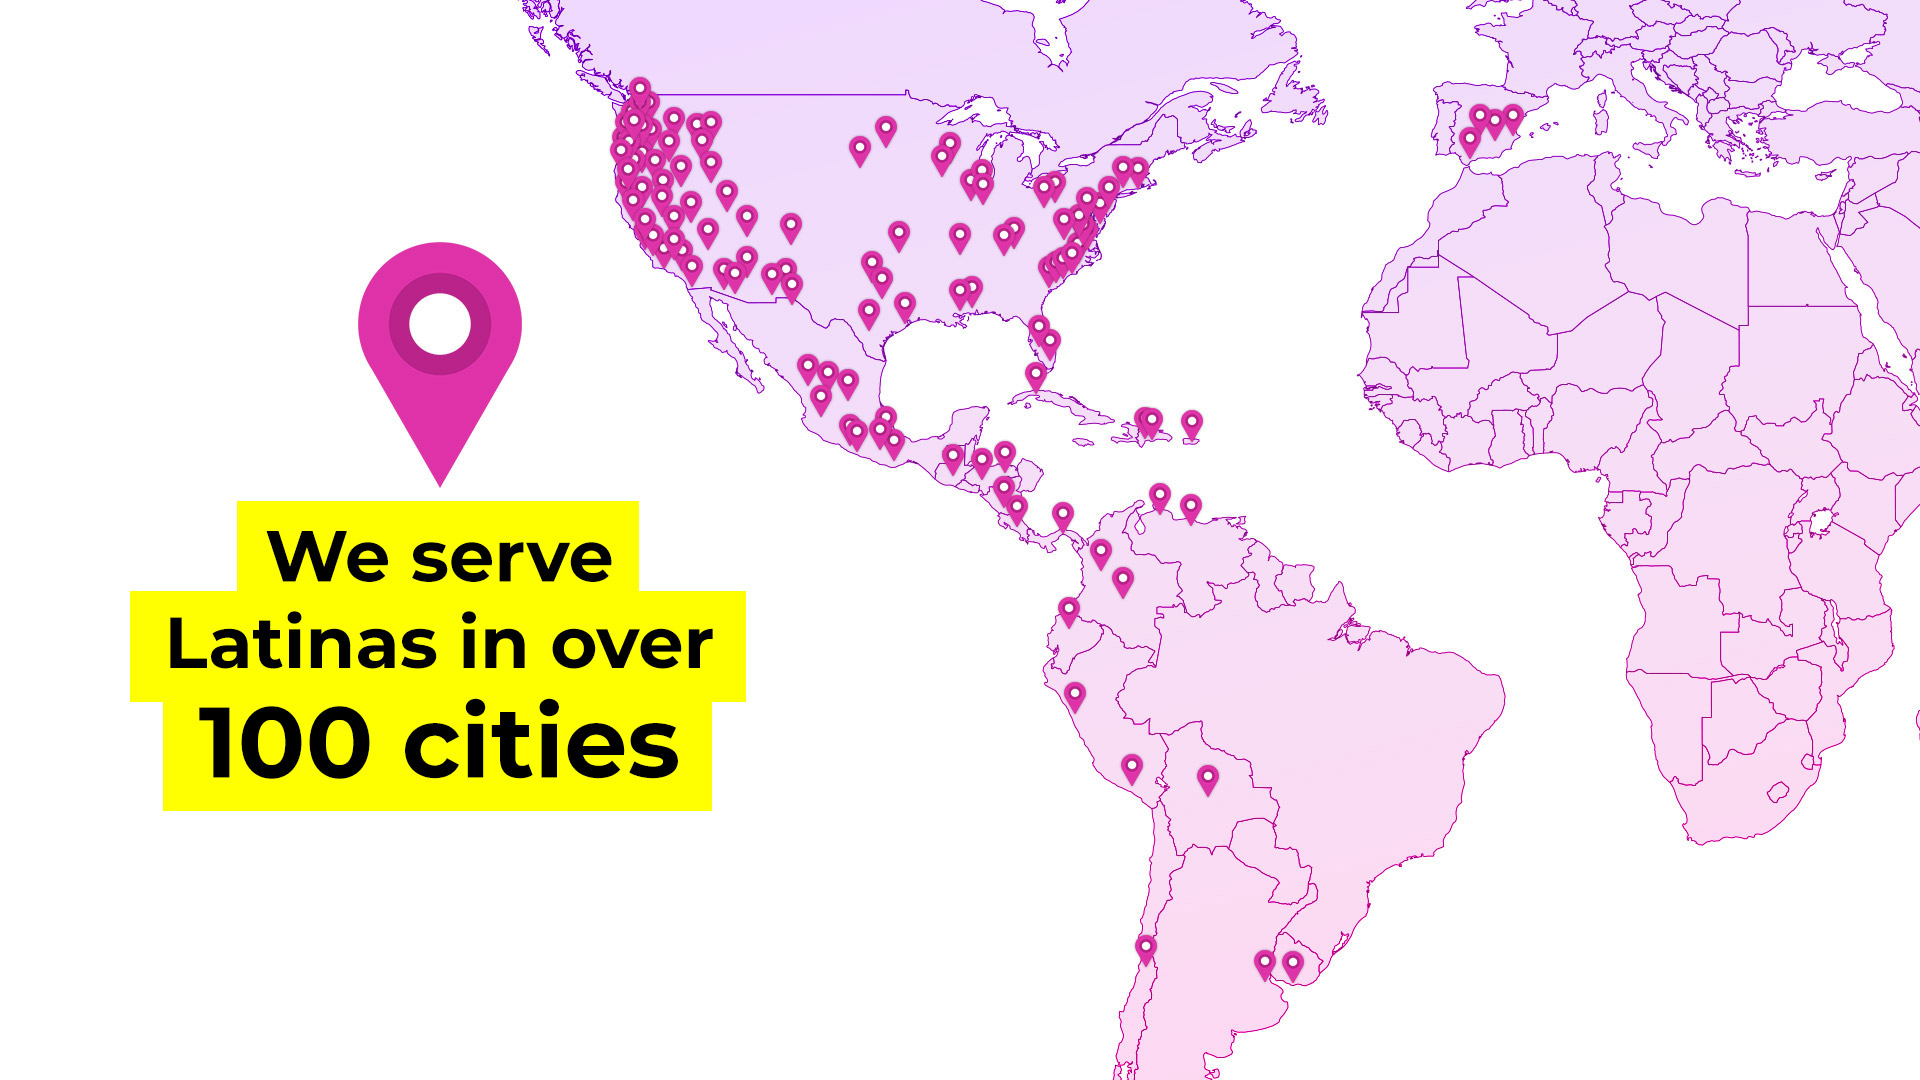 We serve Latinas in over 100 cities around the world